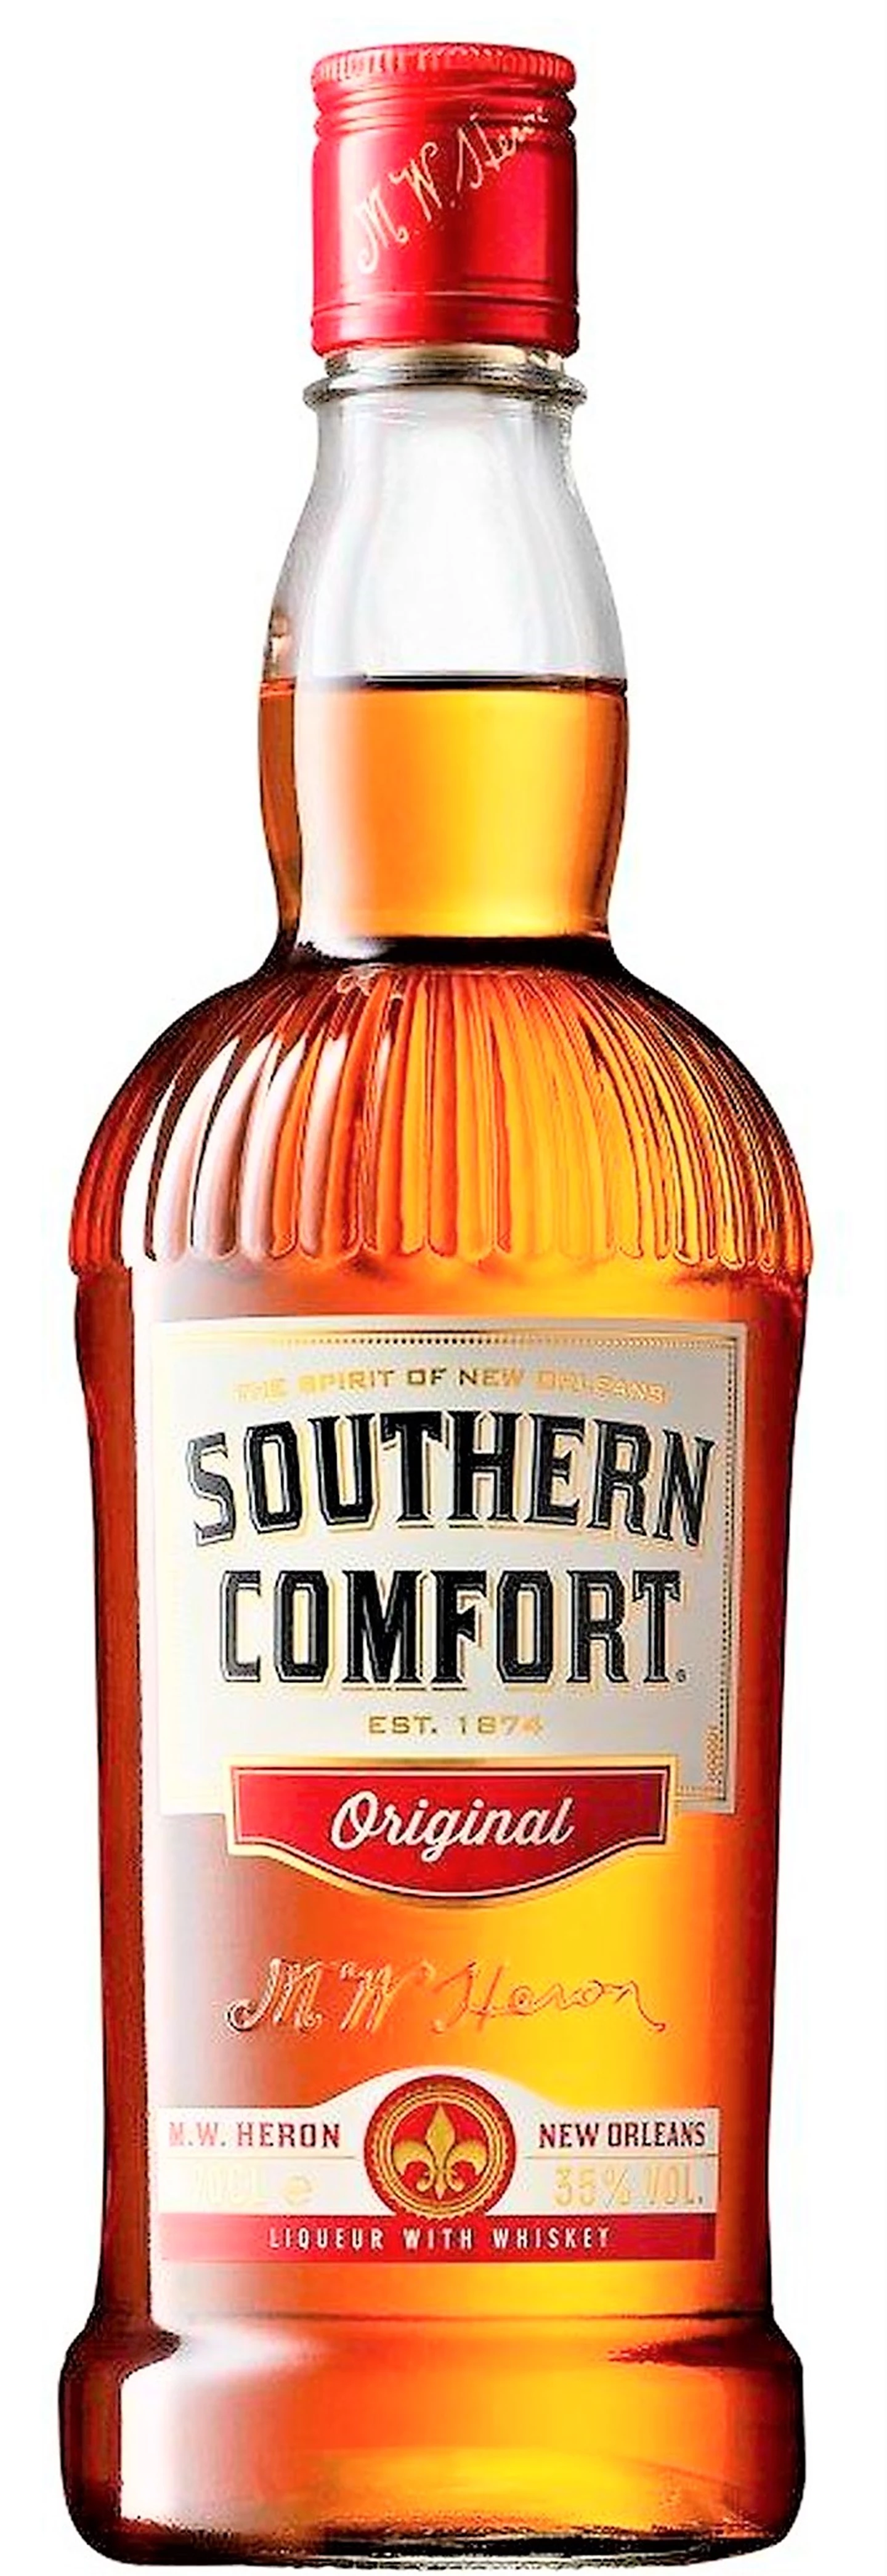 Southern-Comfort_Orininal-Whiskey-Liqueur-35%-70cl